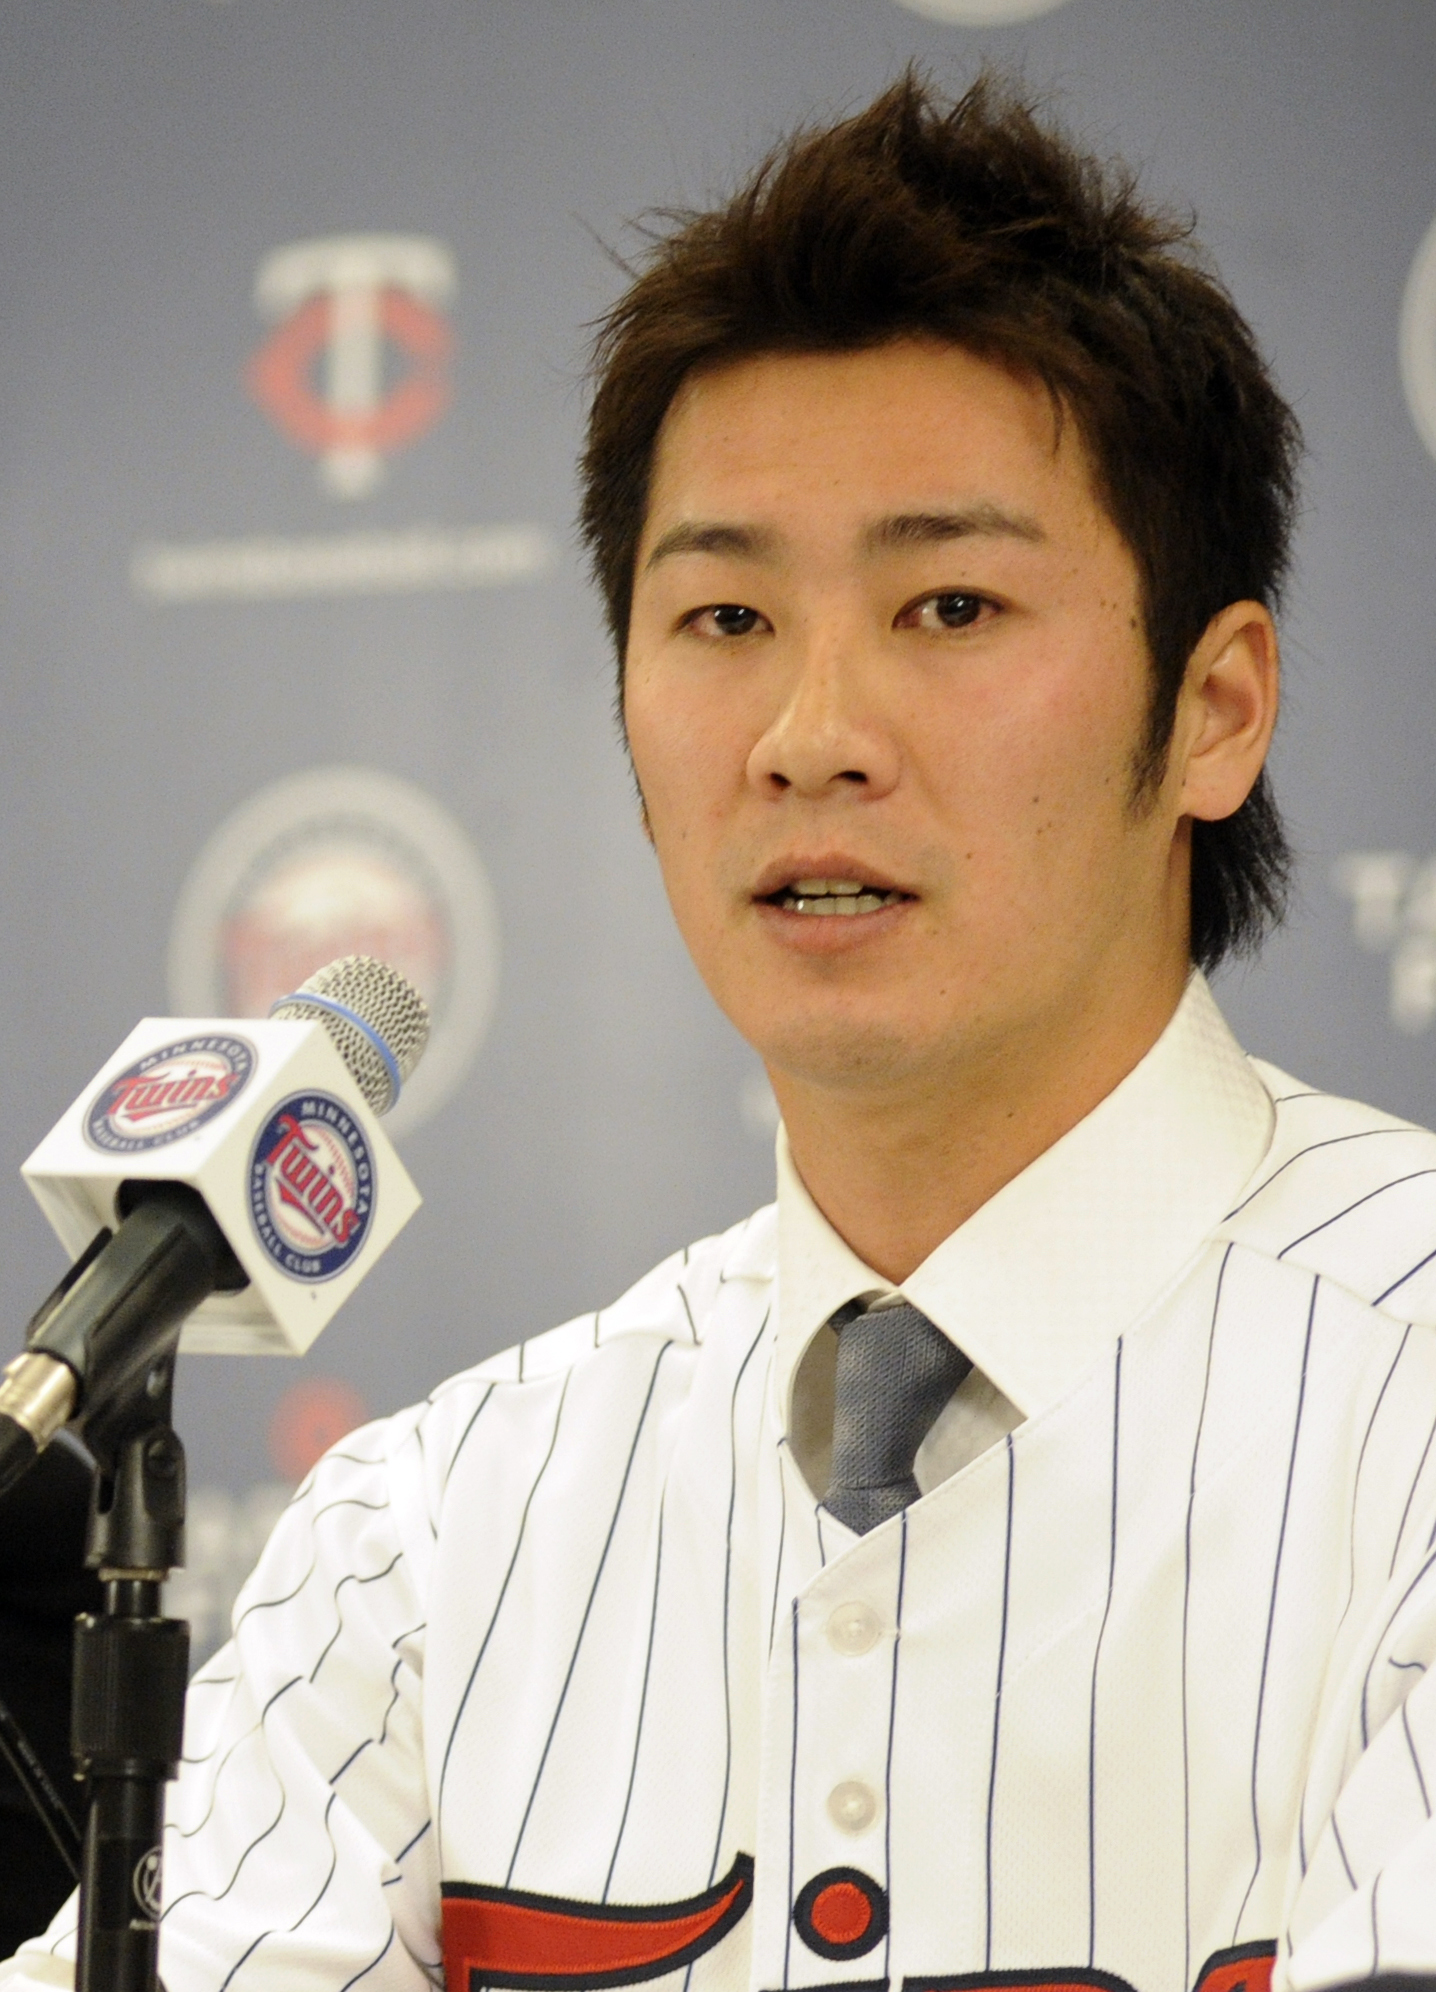 MINNEAPOLIS, MN - DECEMBER 18: Tsuyoshi Nishioka # of the Minnesota Twins speaks to members of the media during a press conference on December 18, 2010 at Target Field in Minneapolis, Minnesota. (Photo by Hannah Foslien/Getty Images)